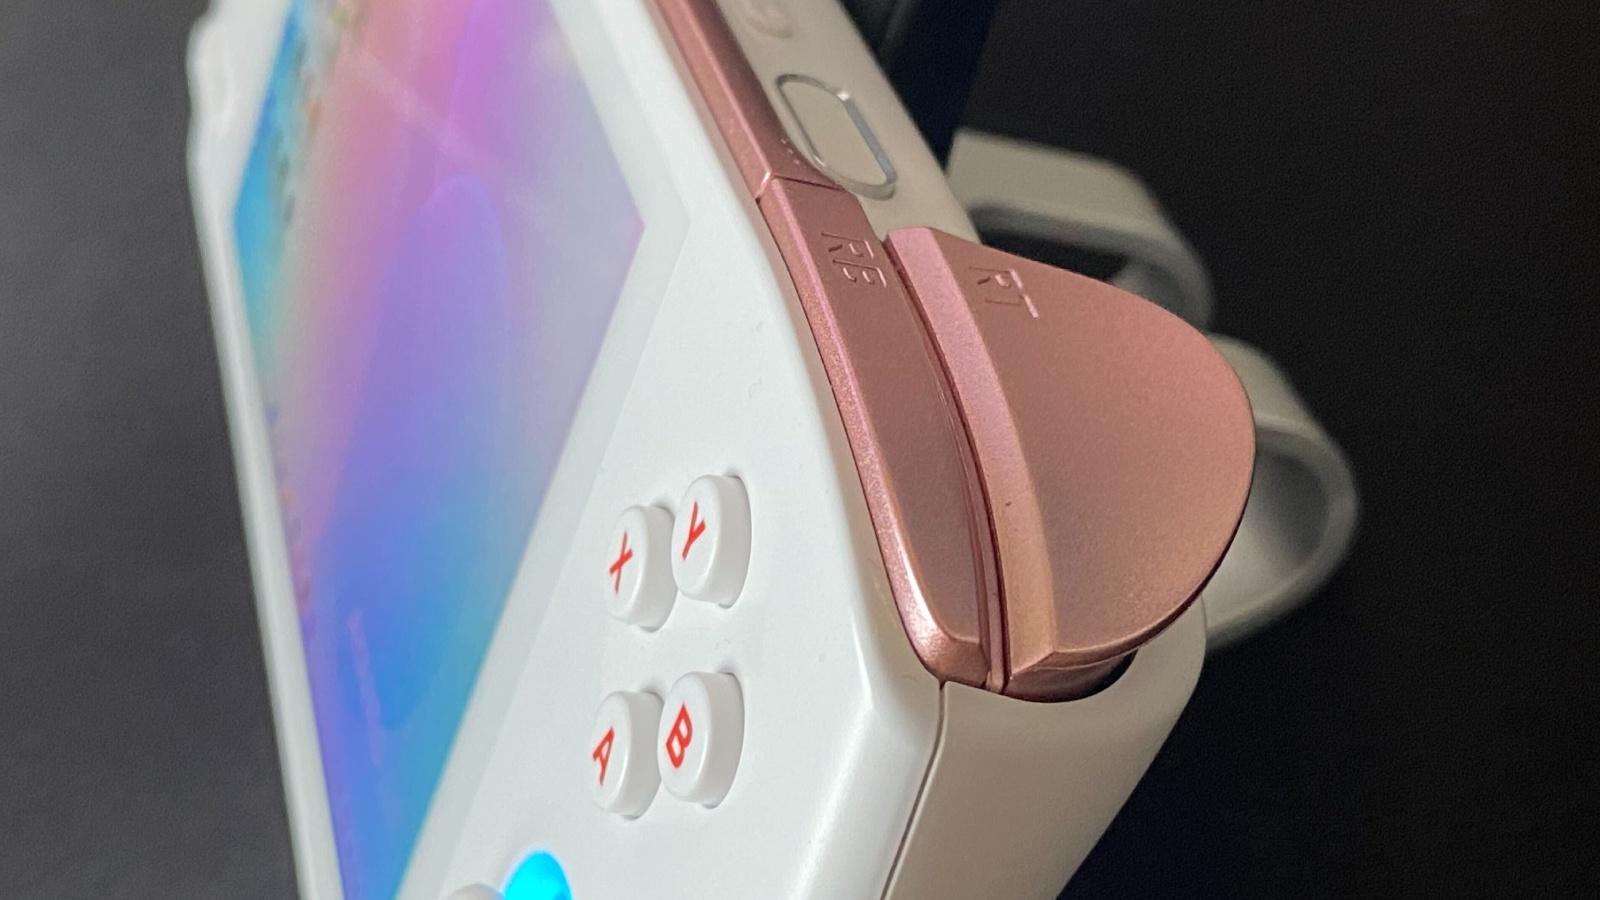 This Portable Gaming Device Looks Like a Giant Nintendo DS